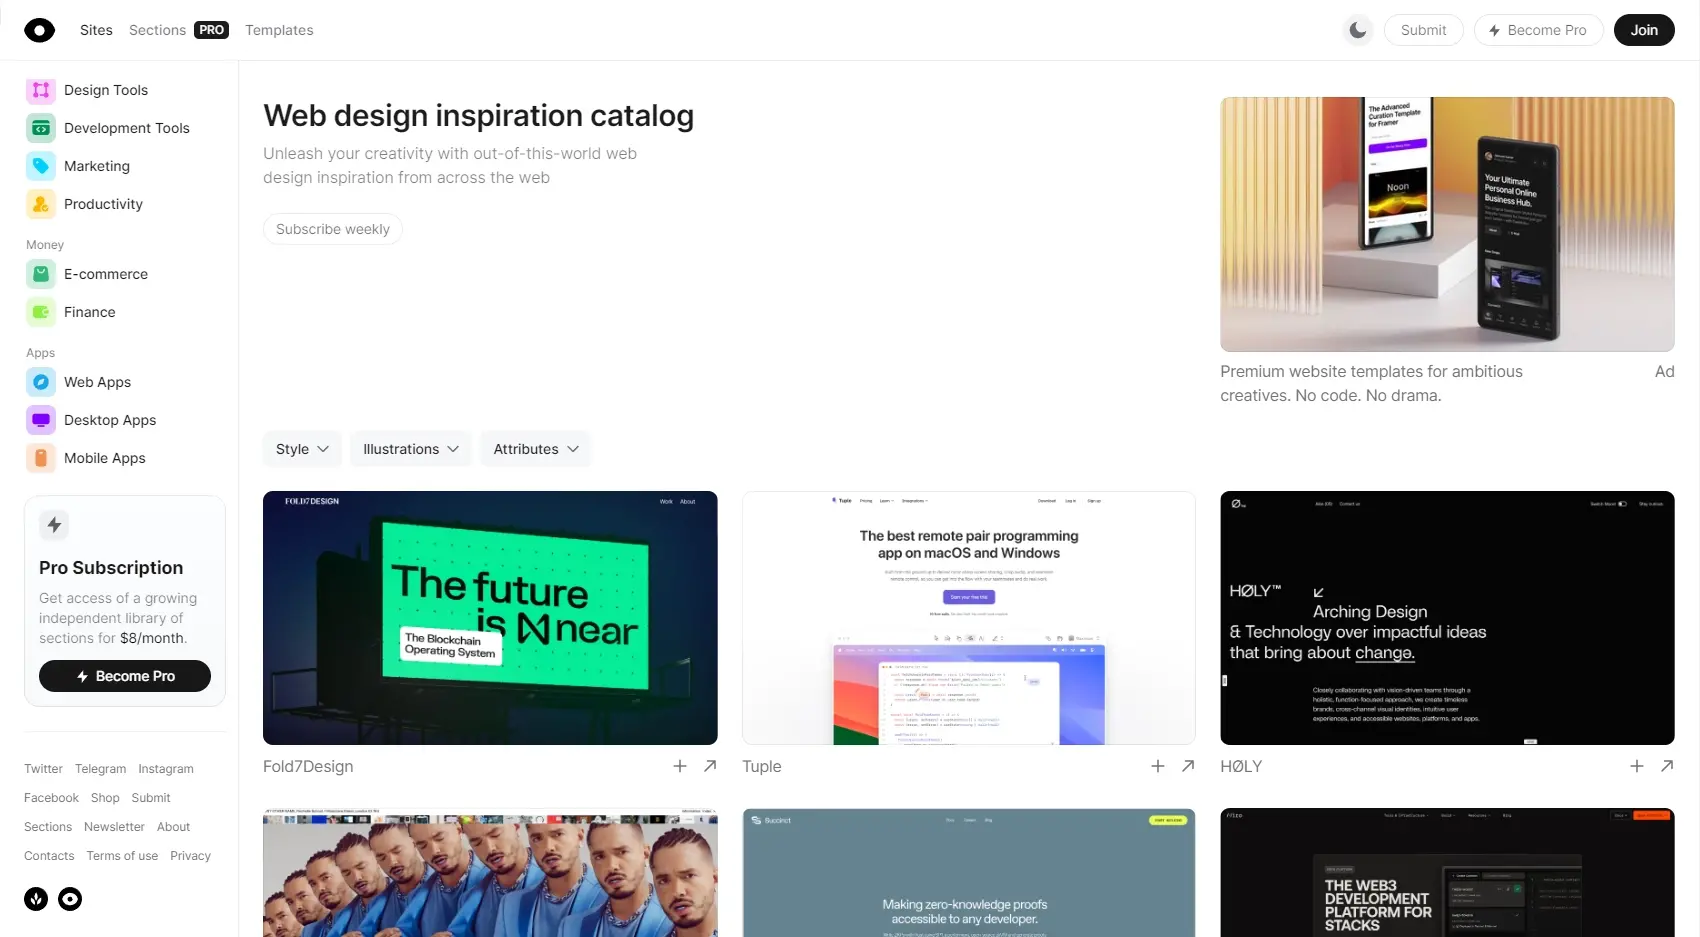 Curated web design inspiration curated design